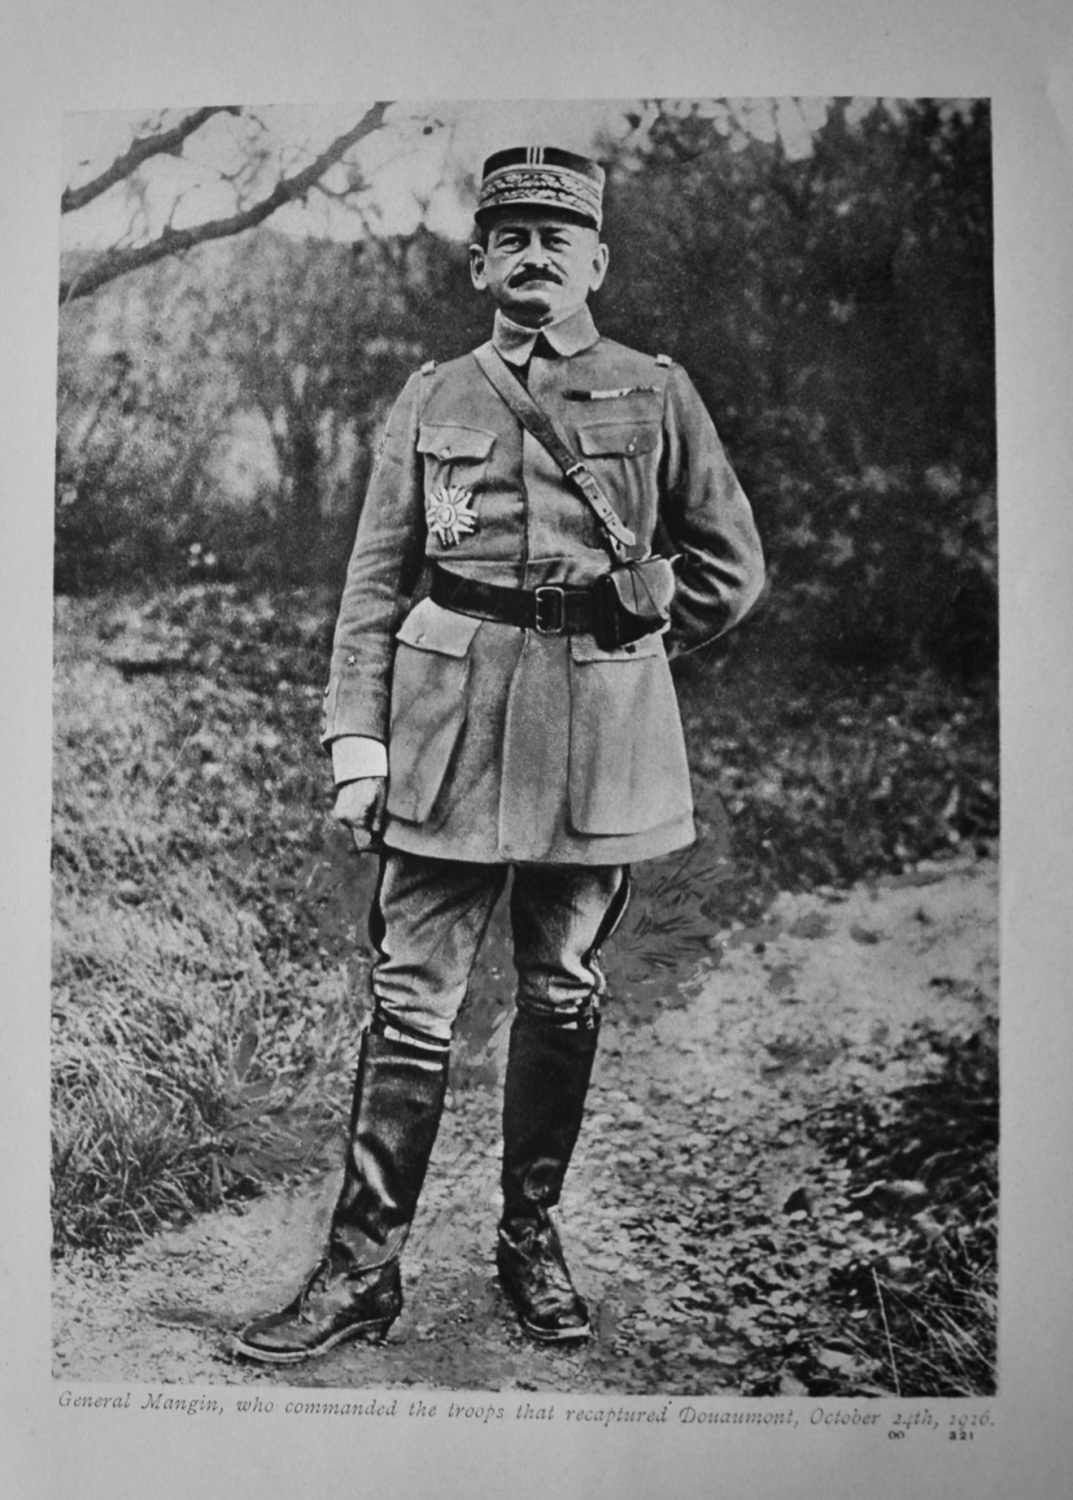 General Mangin, who commanded the troops that recaptured Douaumont, October